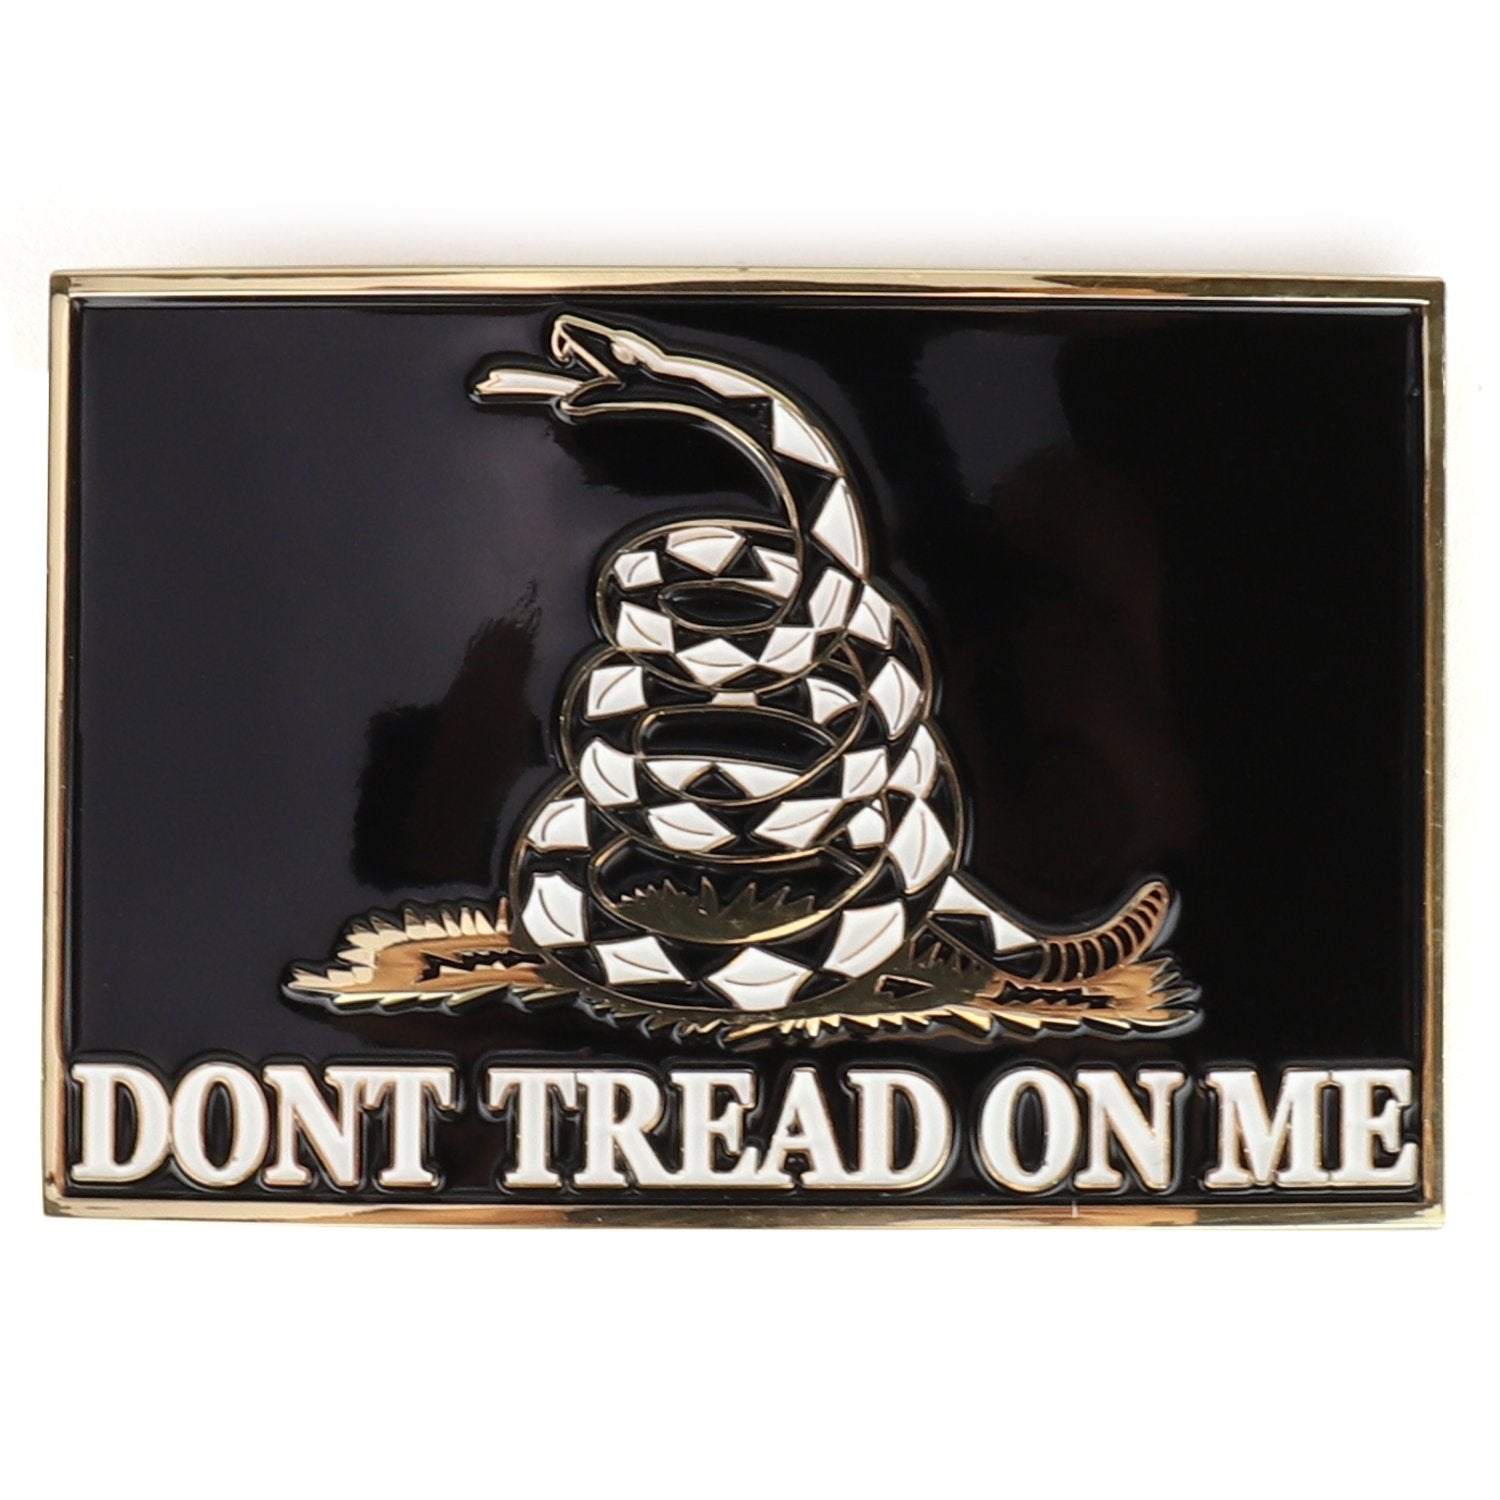 Armycrew Don't Tread On Me Snake Logo Military Metal Belt Buckle